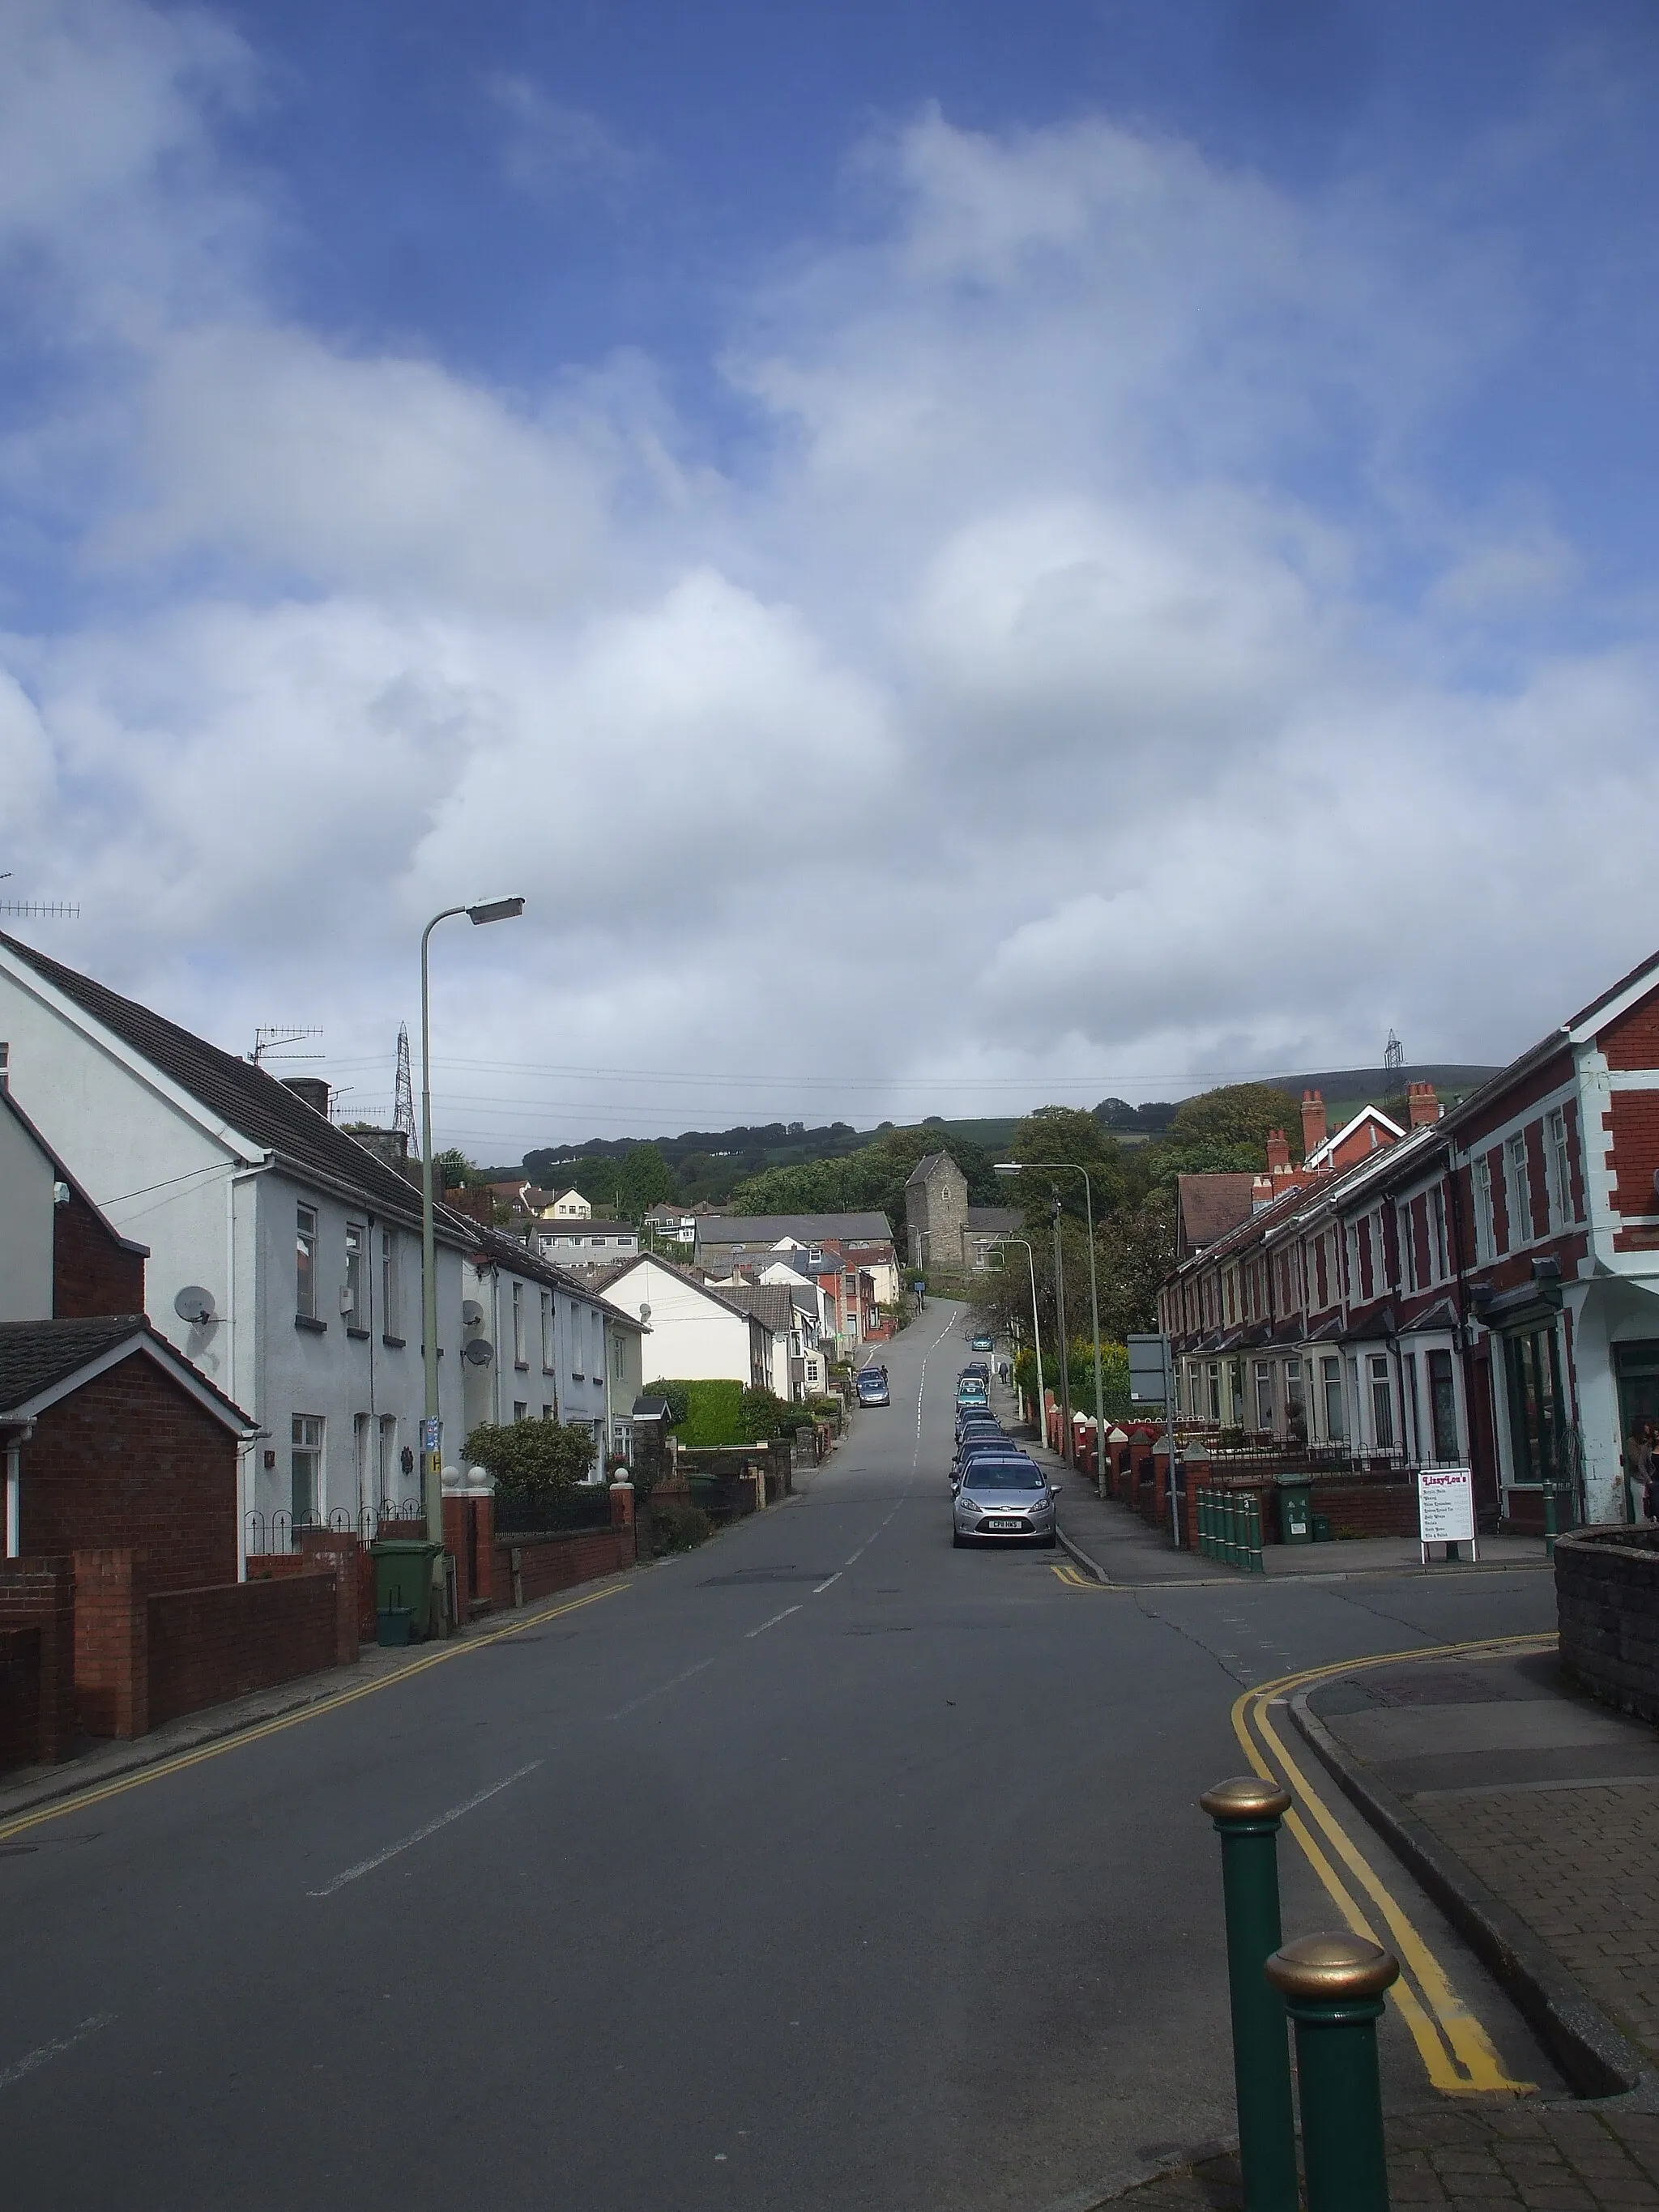 Image of Bedwas